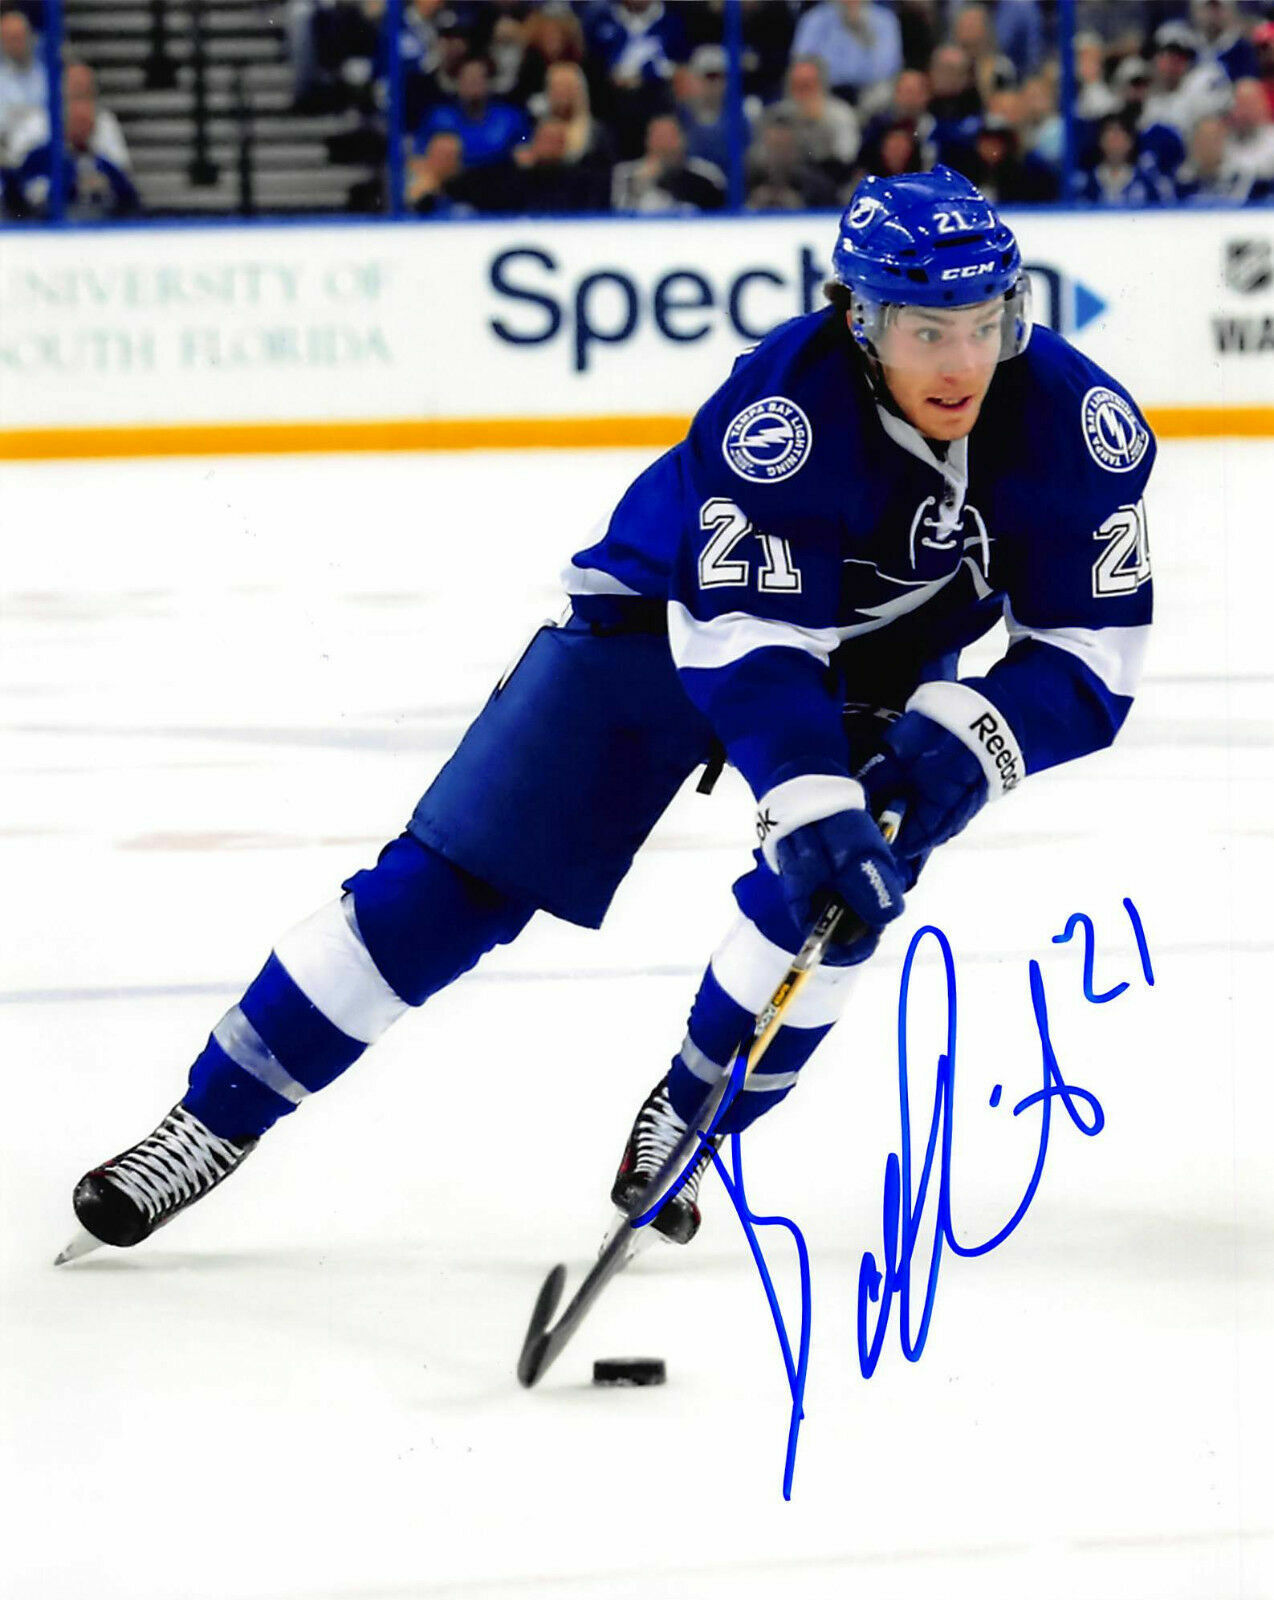 Brayden Point Autographed Signed 8x10 Photo Poster painting ( Maple Leafs ) REPRINT